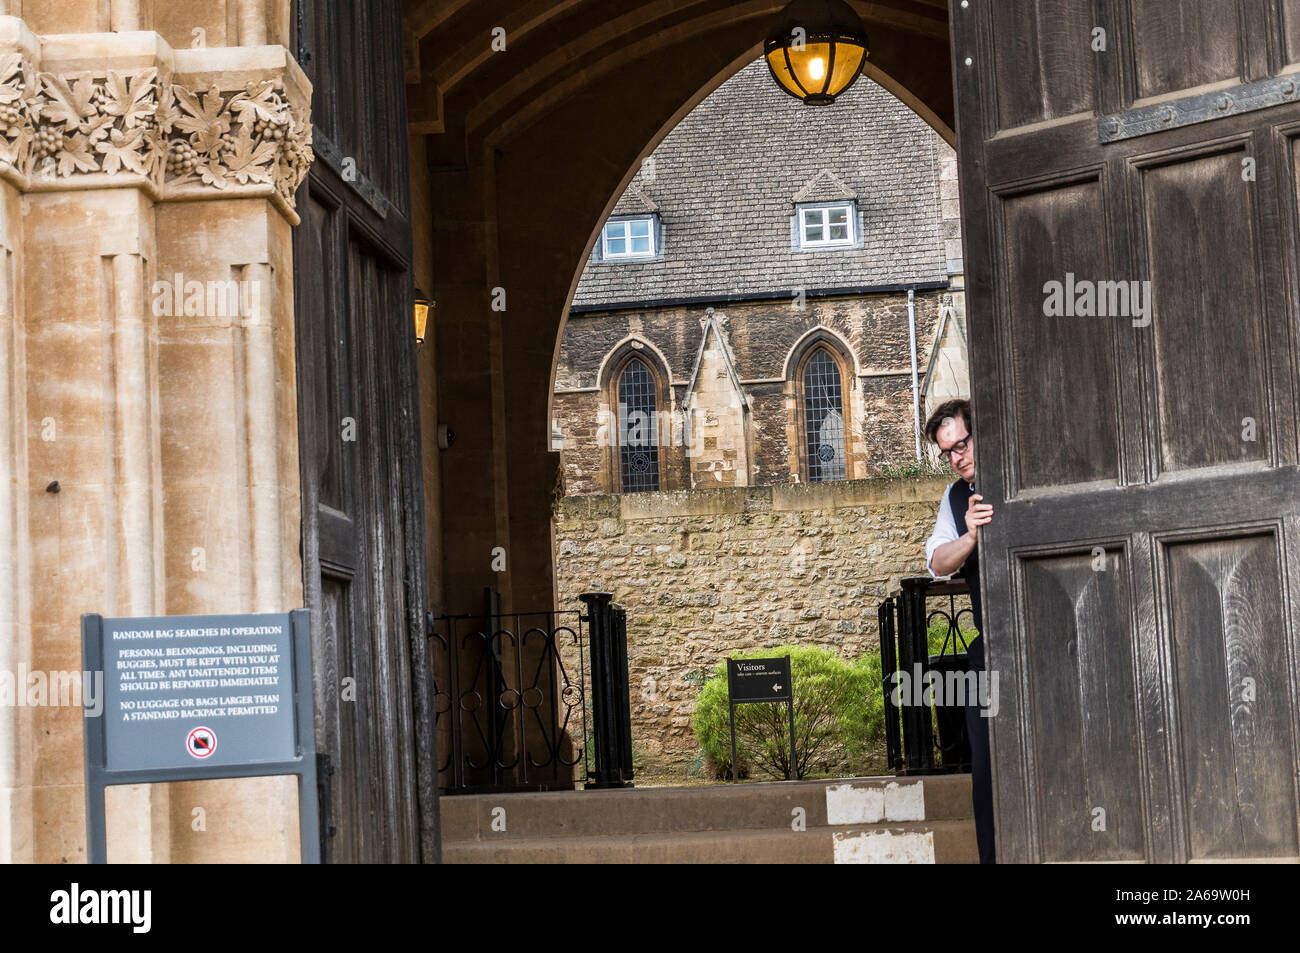 Oxford University - Visiting the colleges - a beautiful city of stunning architecture, history and culture Stock Photo